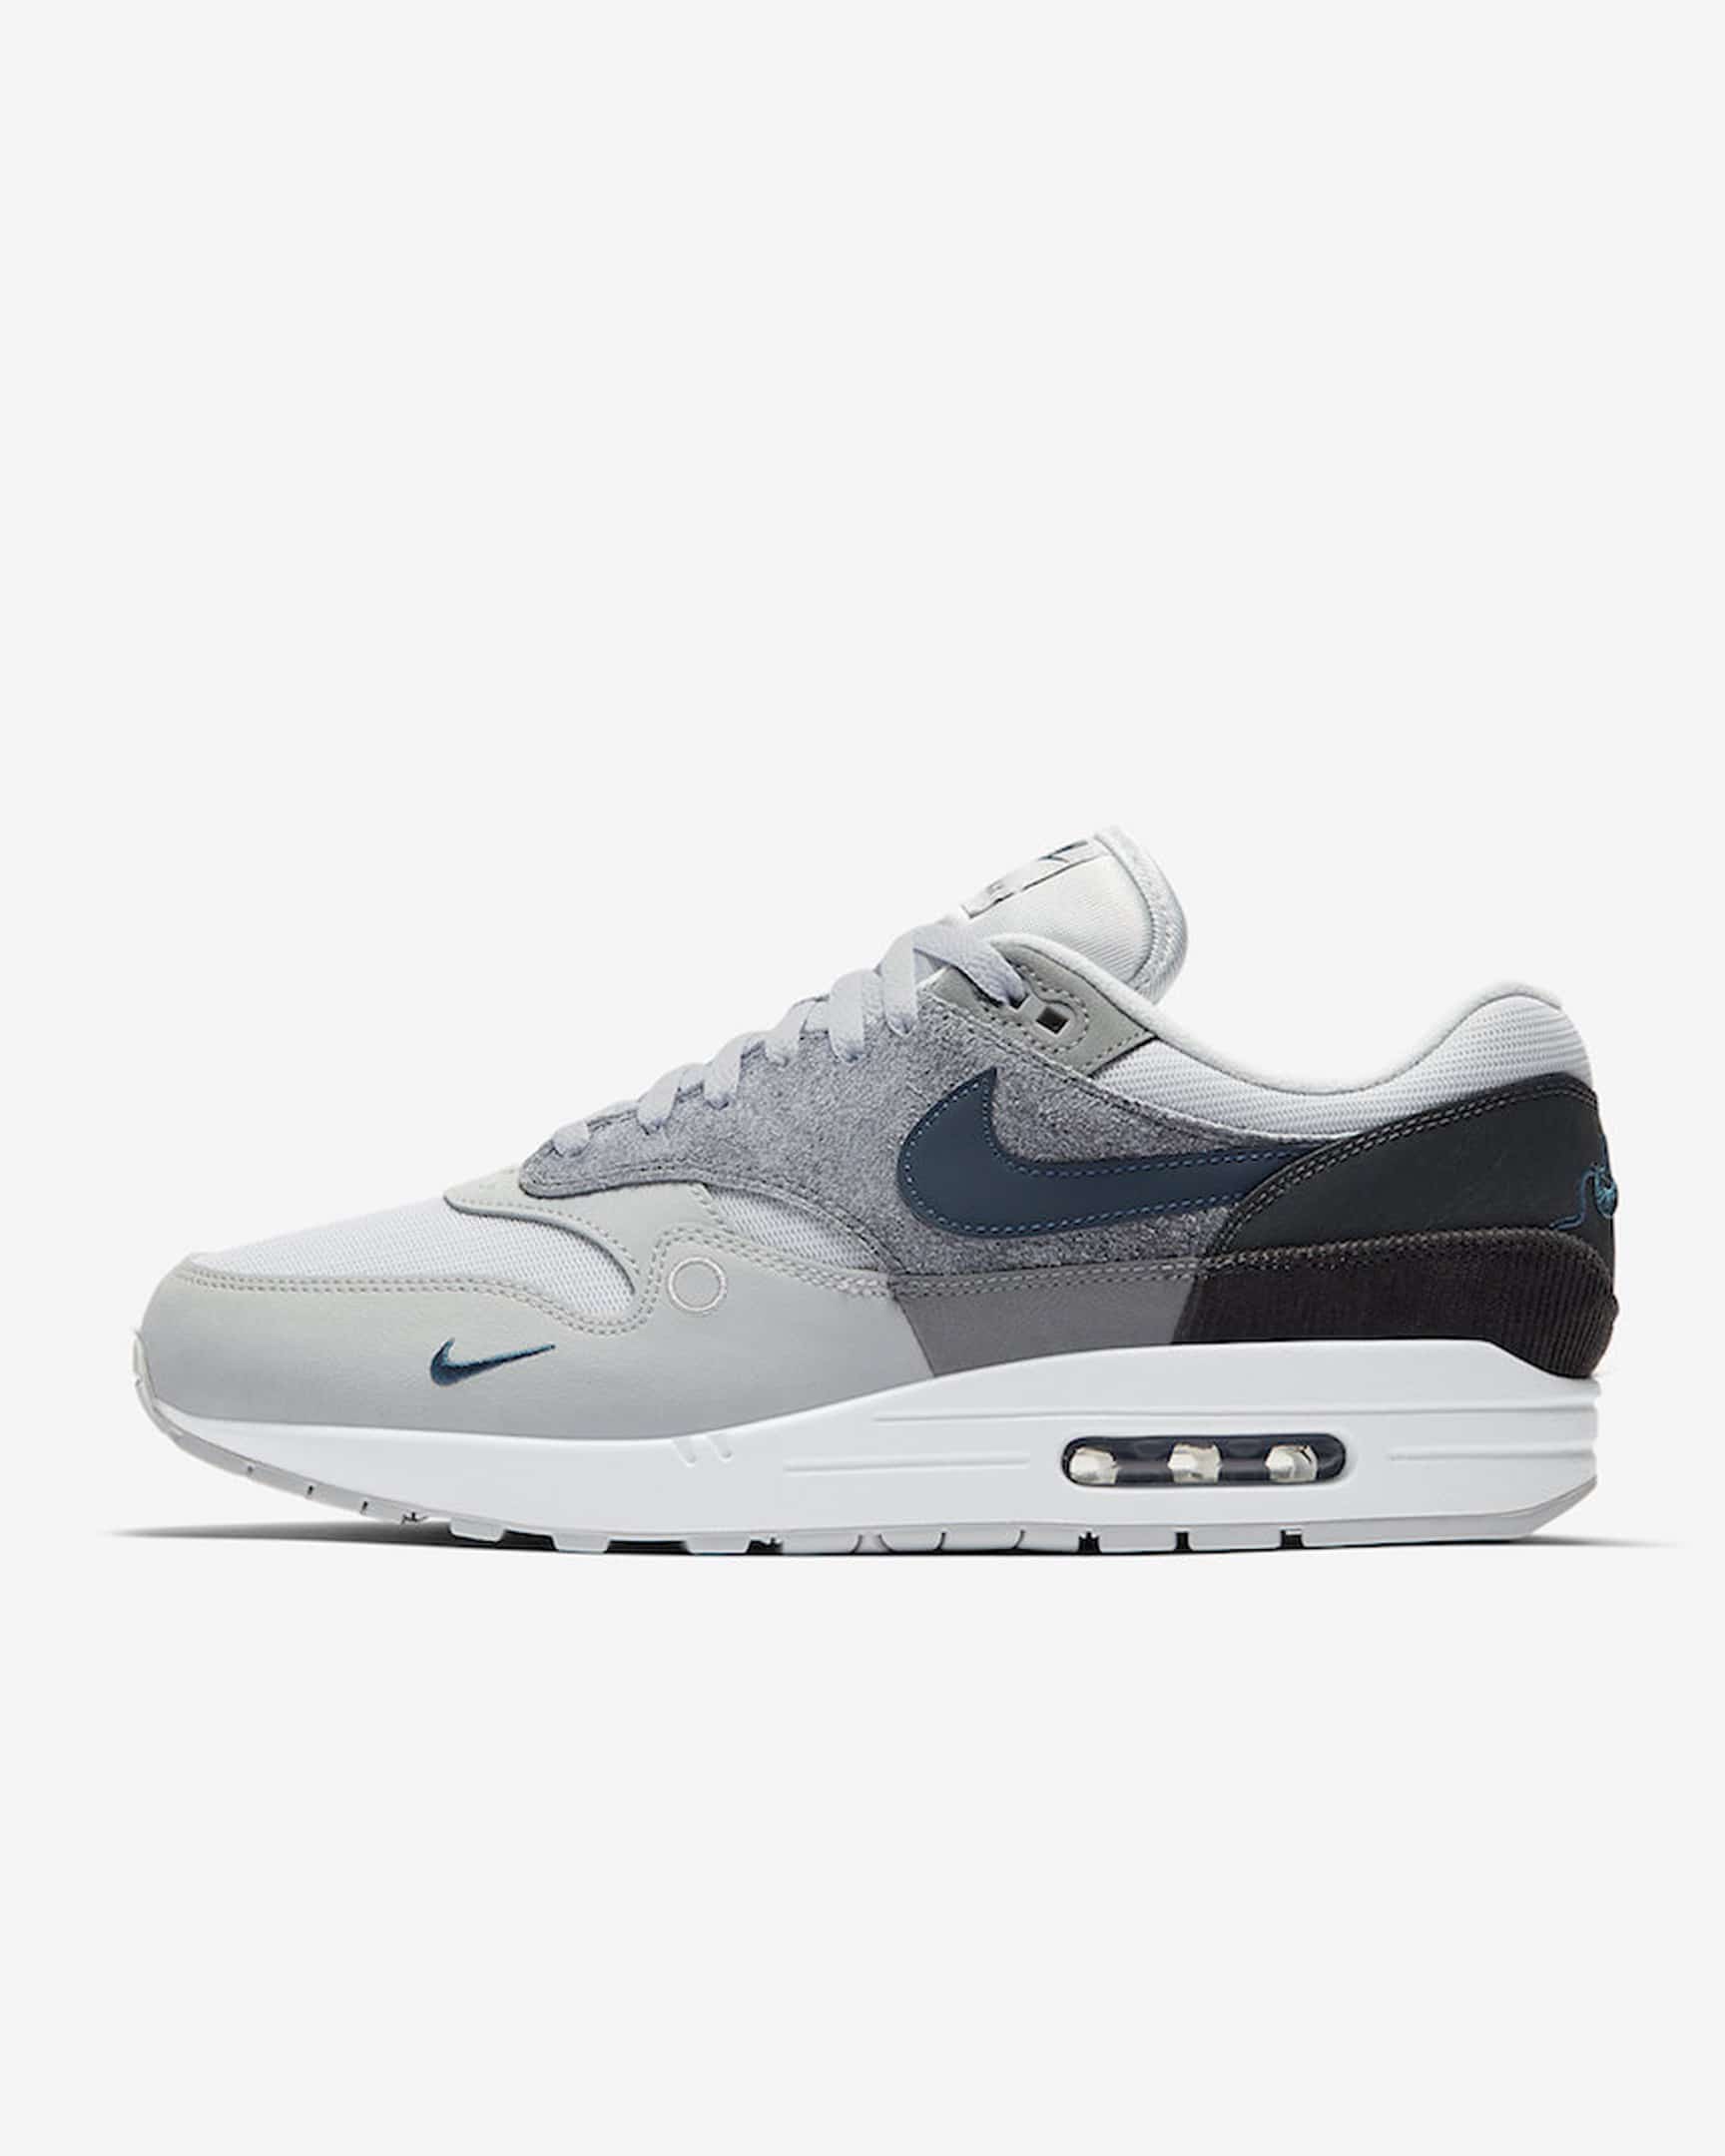 How to Cop Nike Air Max 1 London Release Links & Raffles